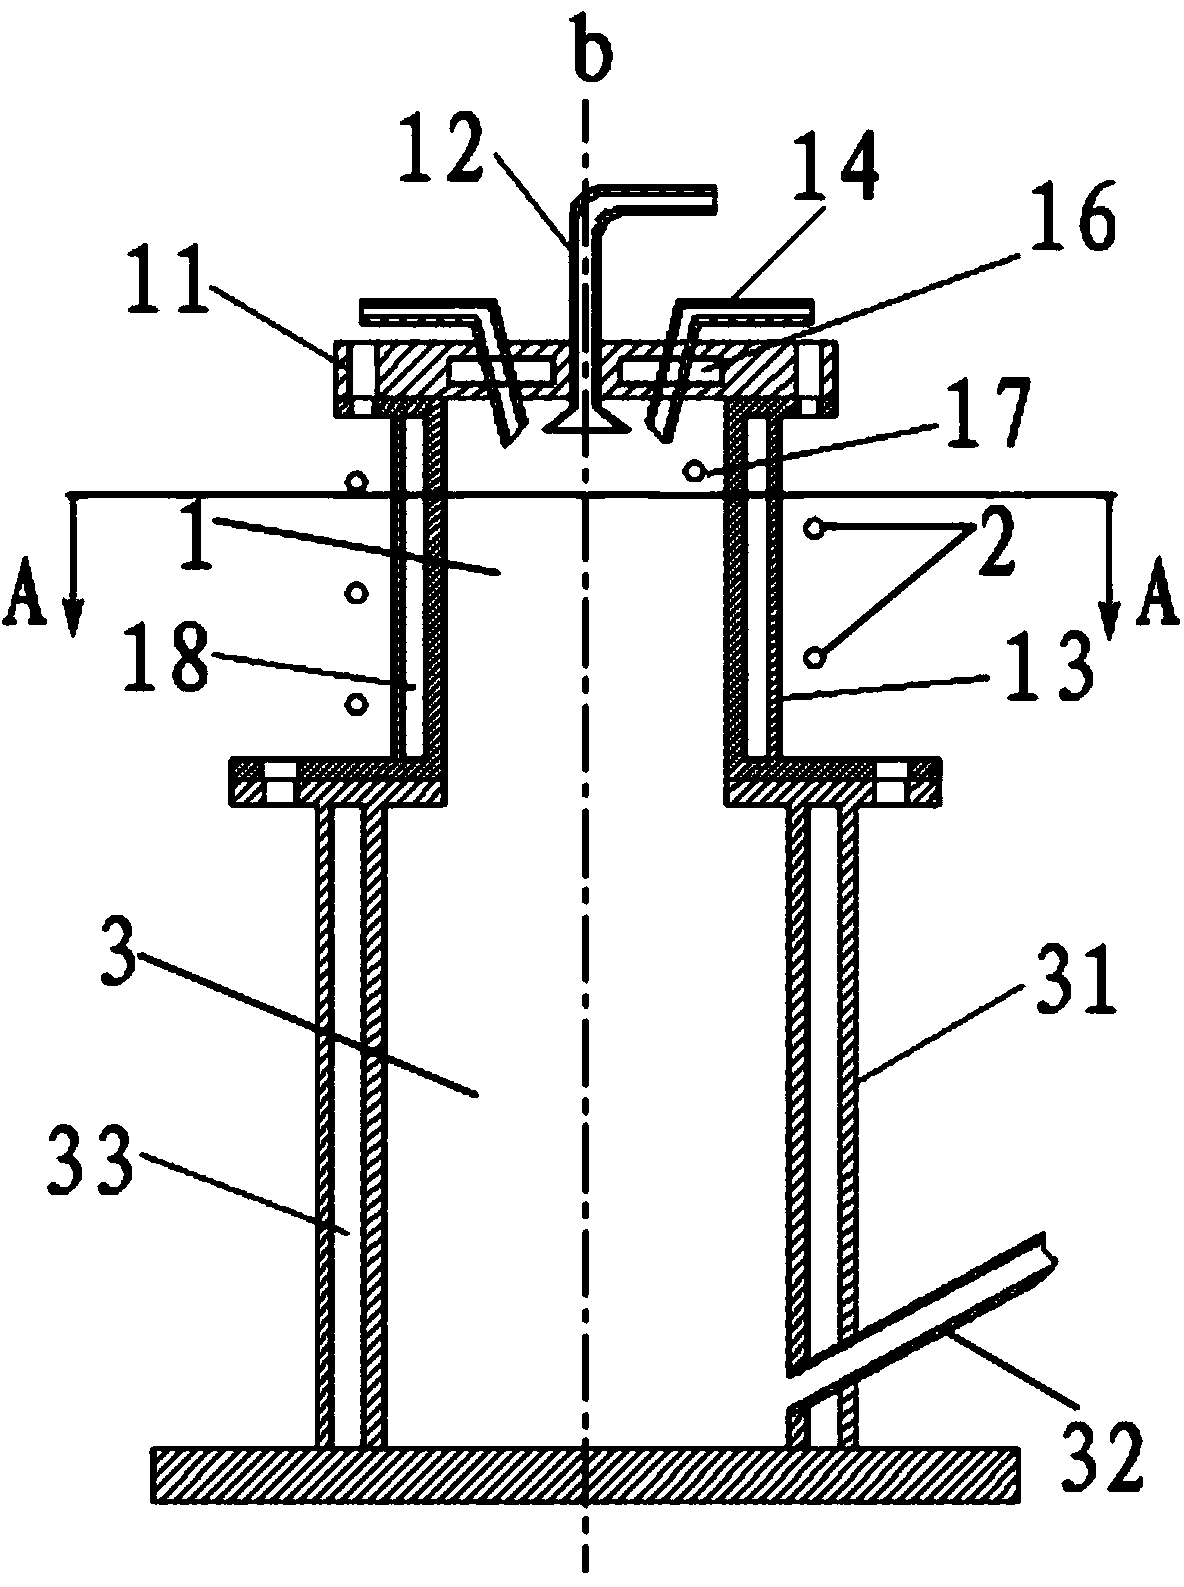 Device and system for spheroidizing powder by using alternating-current plasmas